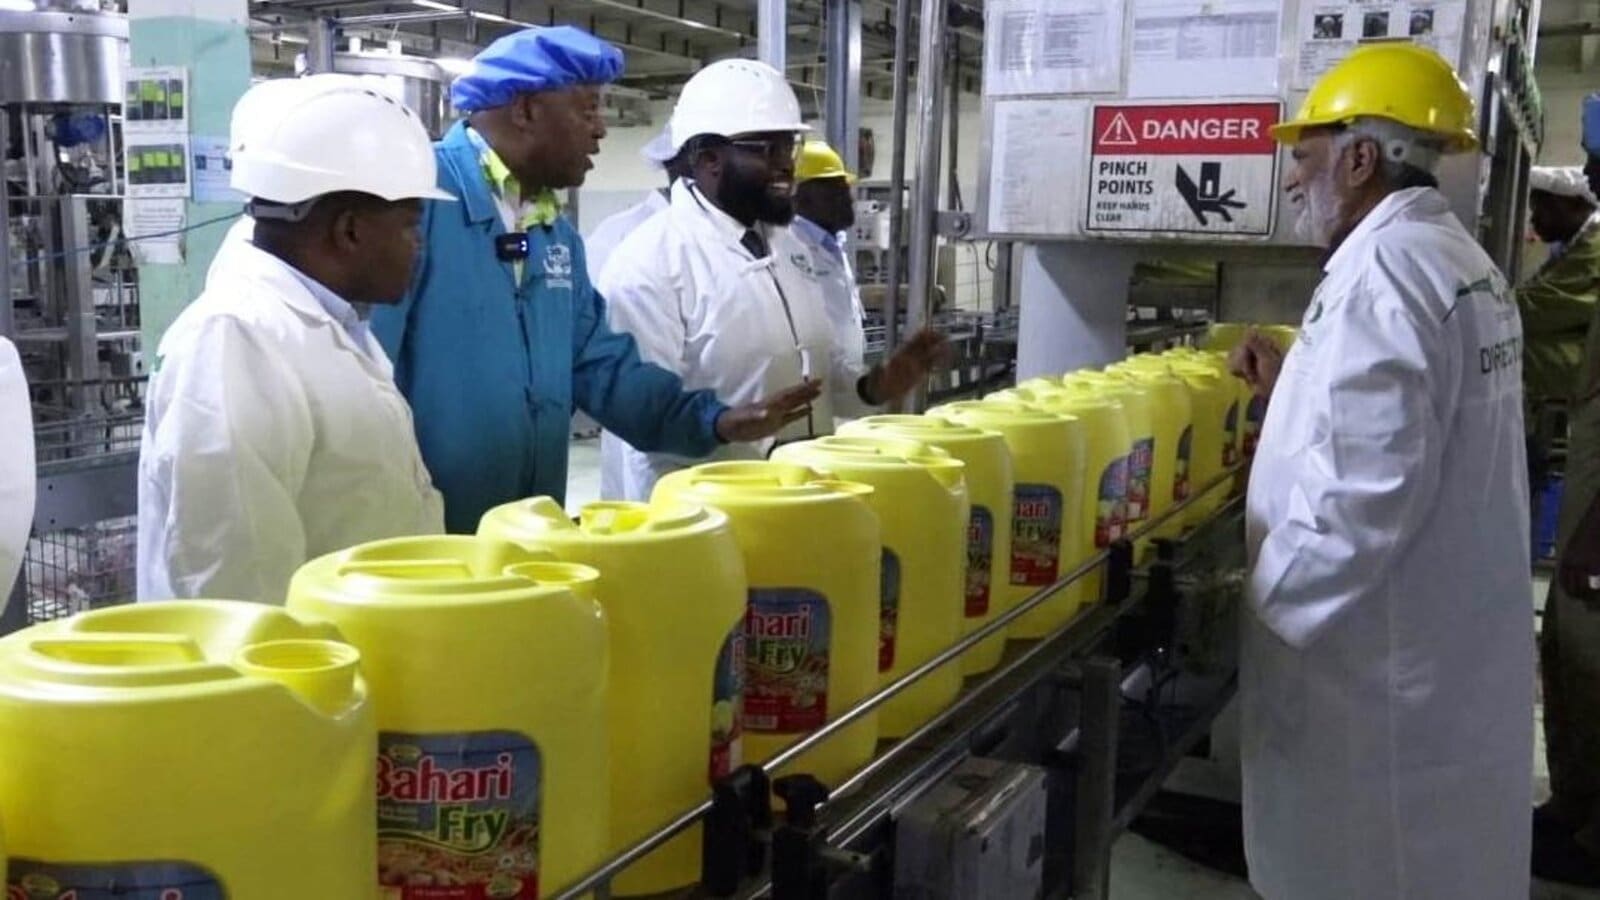 Edible oil manufacturer, Bidco Africa, plans to eliminate usage of some plastic bottles within its value chain